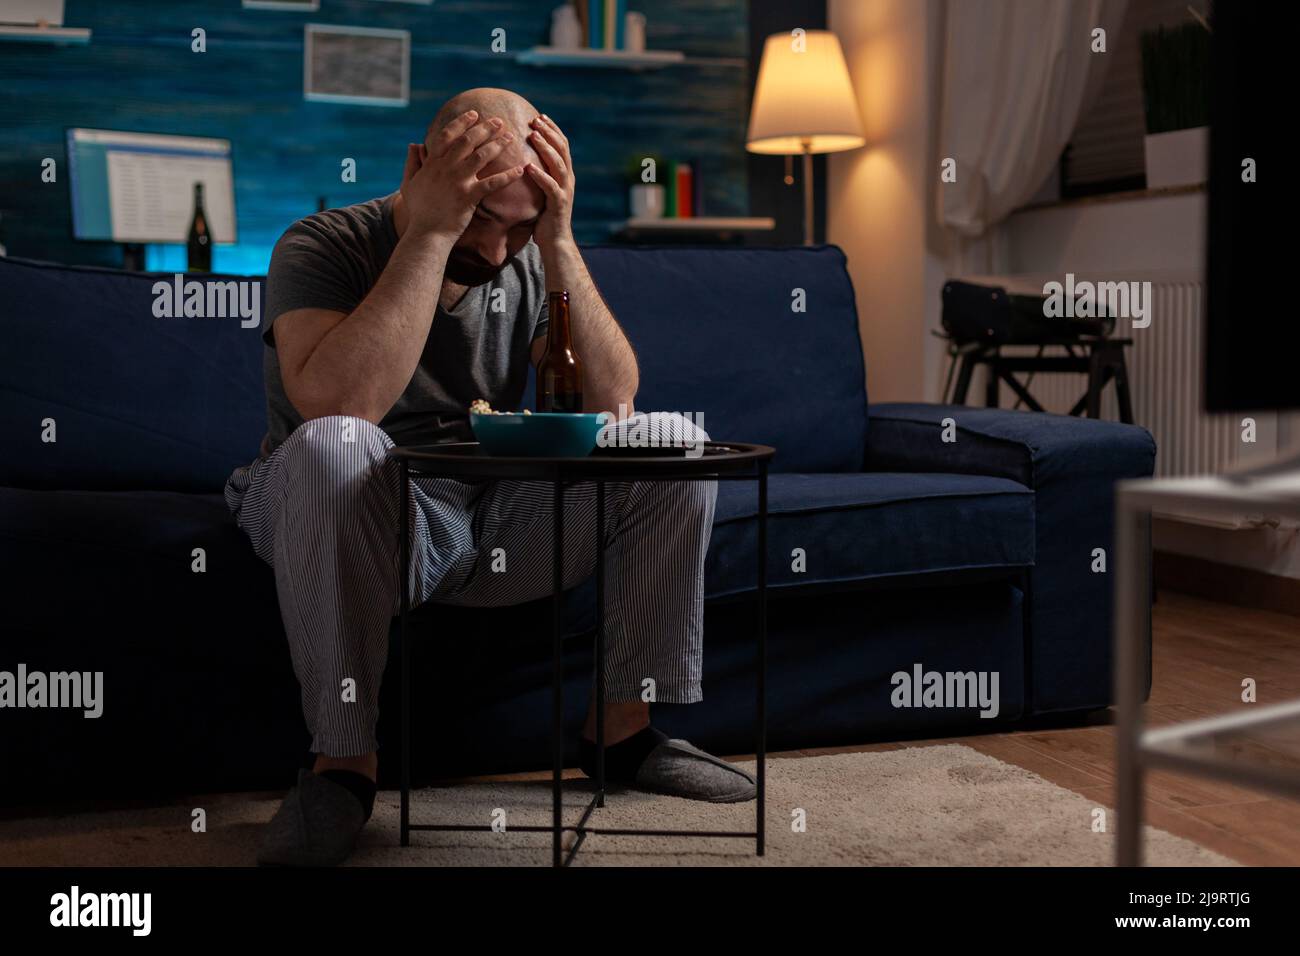 Frustrated man watching sports on television program and feeling sad about football team losing championship game. Soccer supporter fan feeling upset and emotional about match defeat. Stock Photo